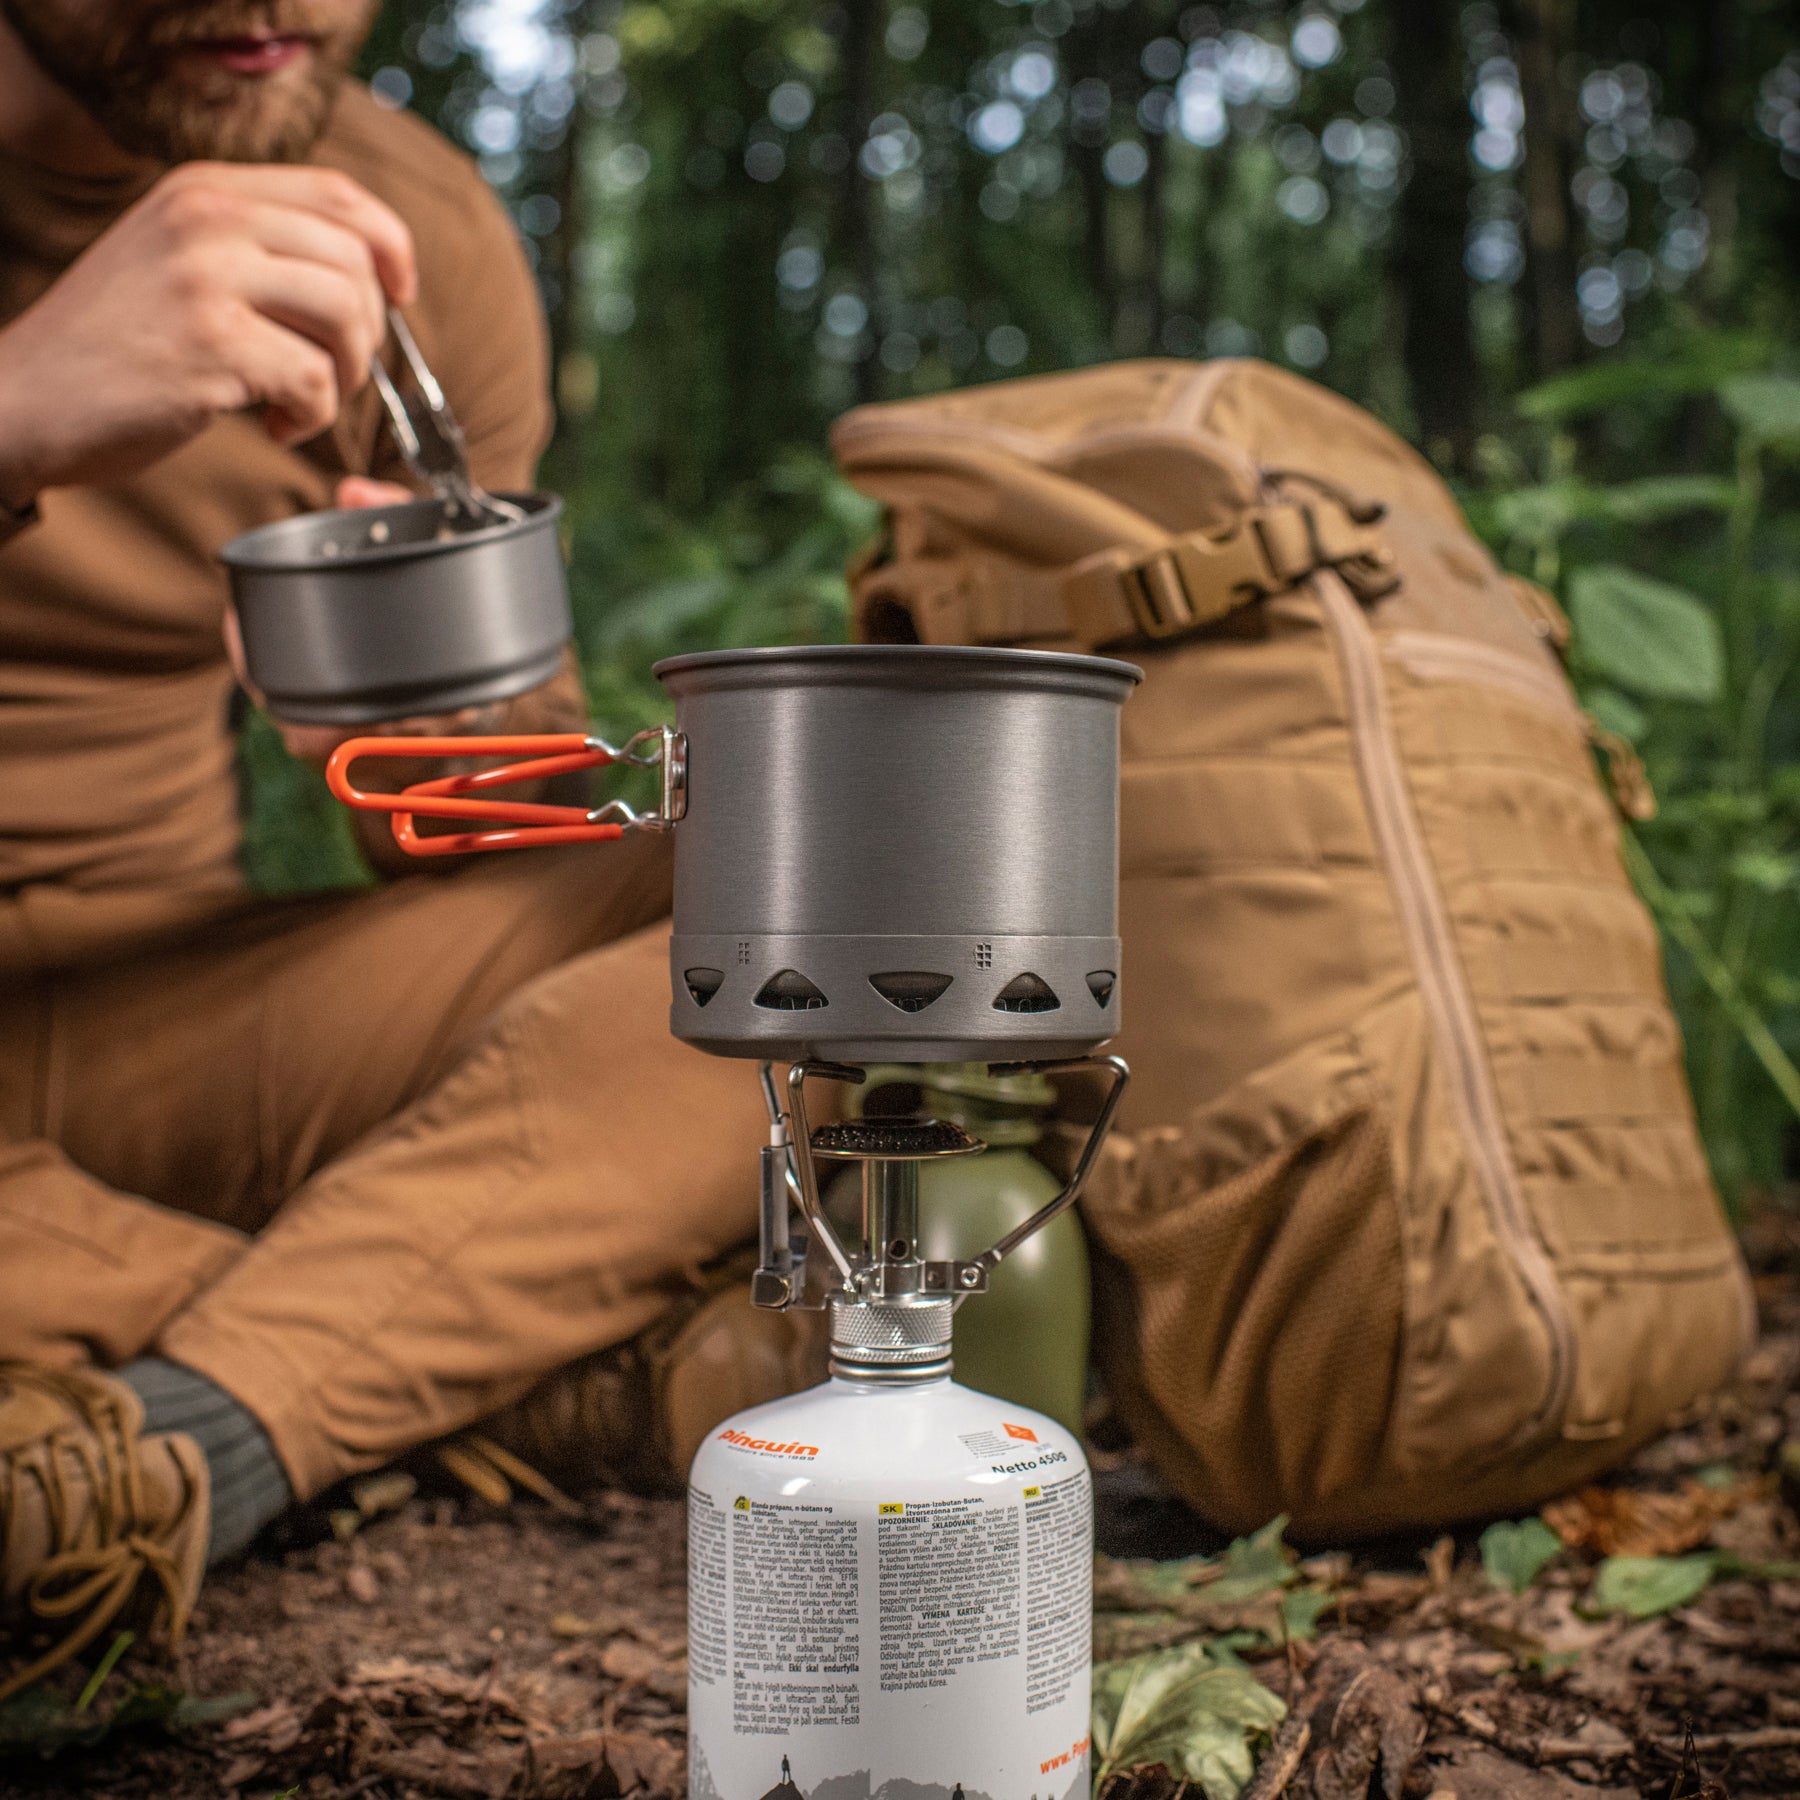 Tactical Camping Kitchen Set: Cups, Bottles and Utensils | M-TAC